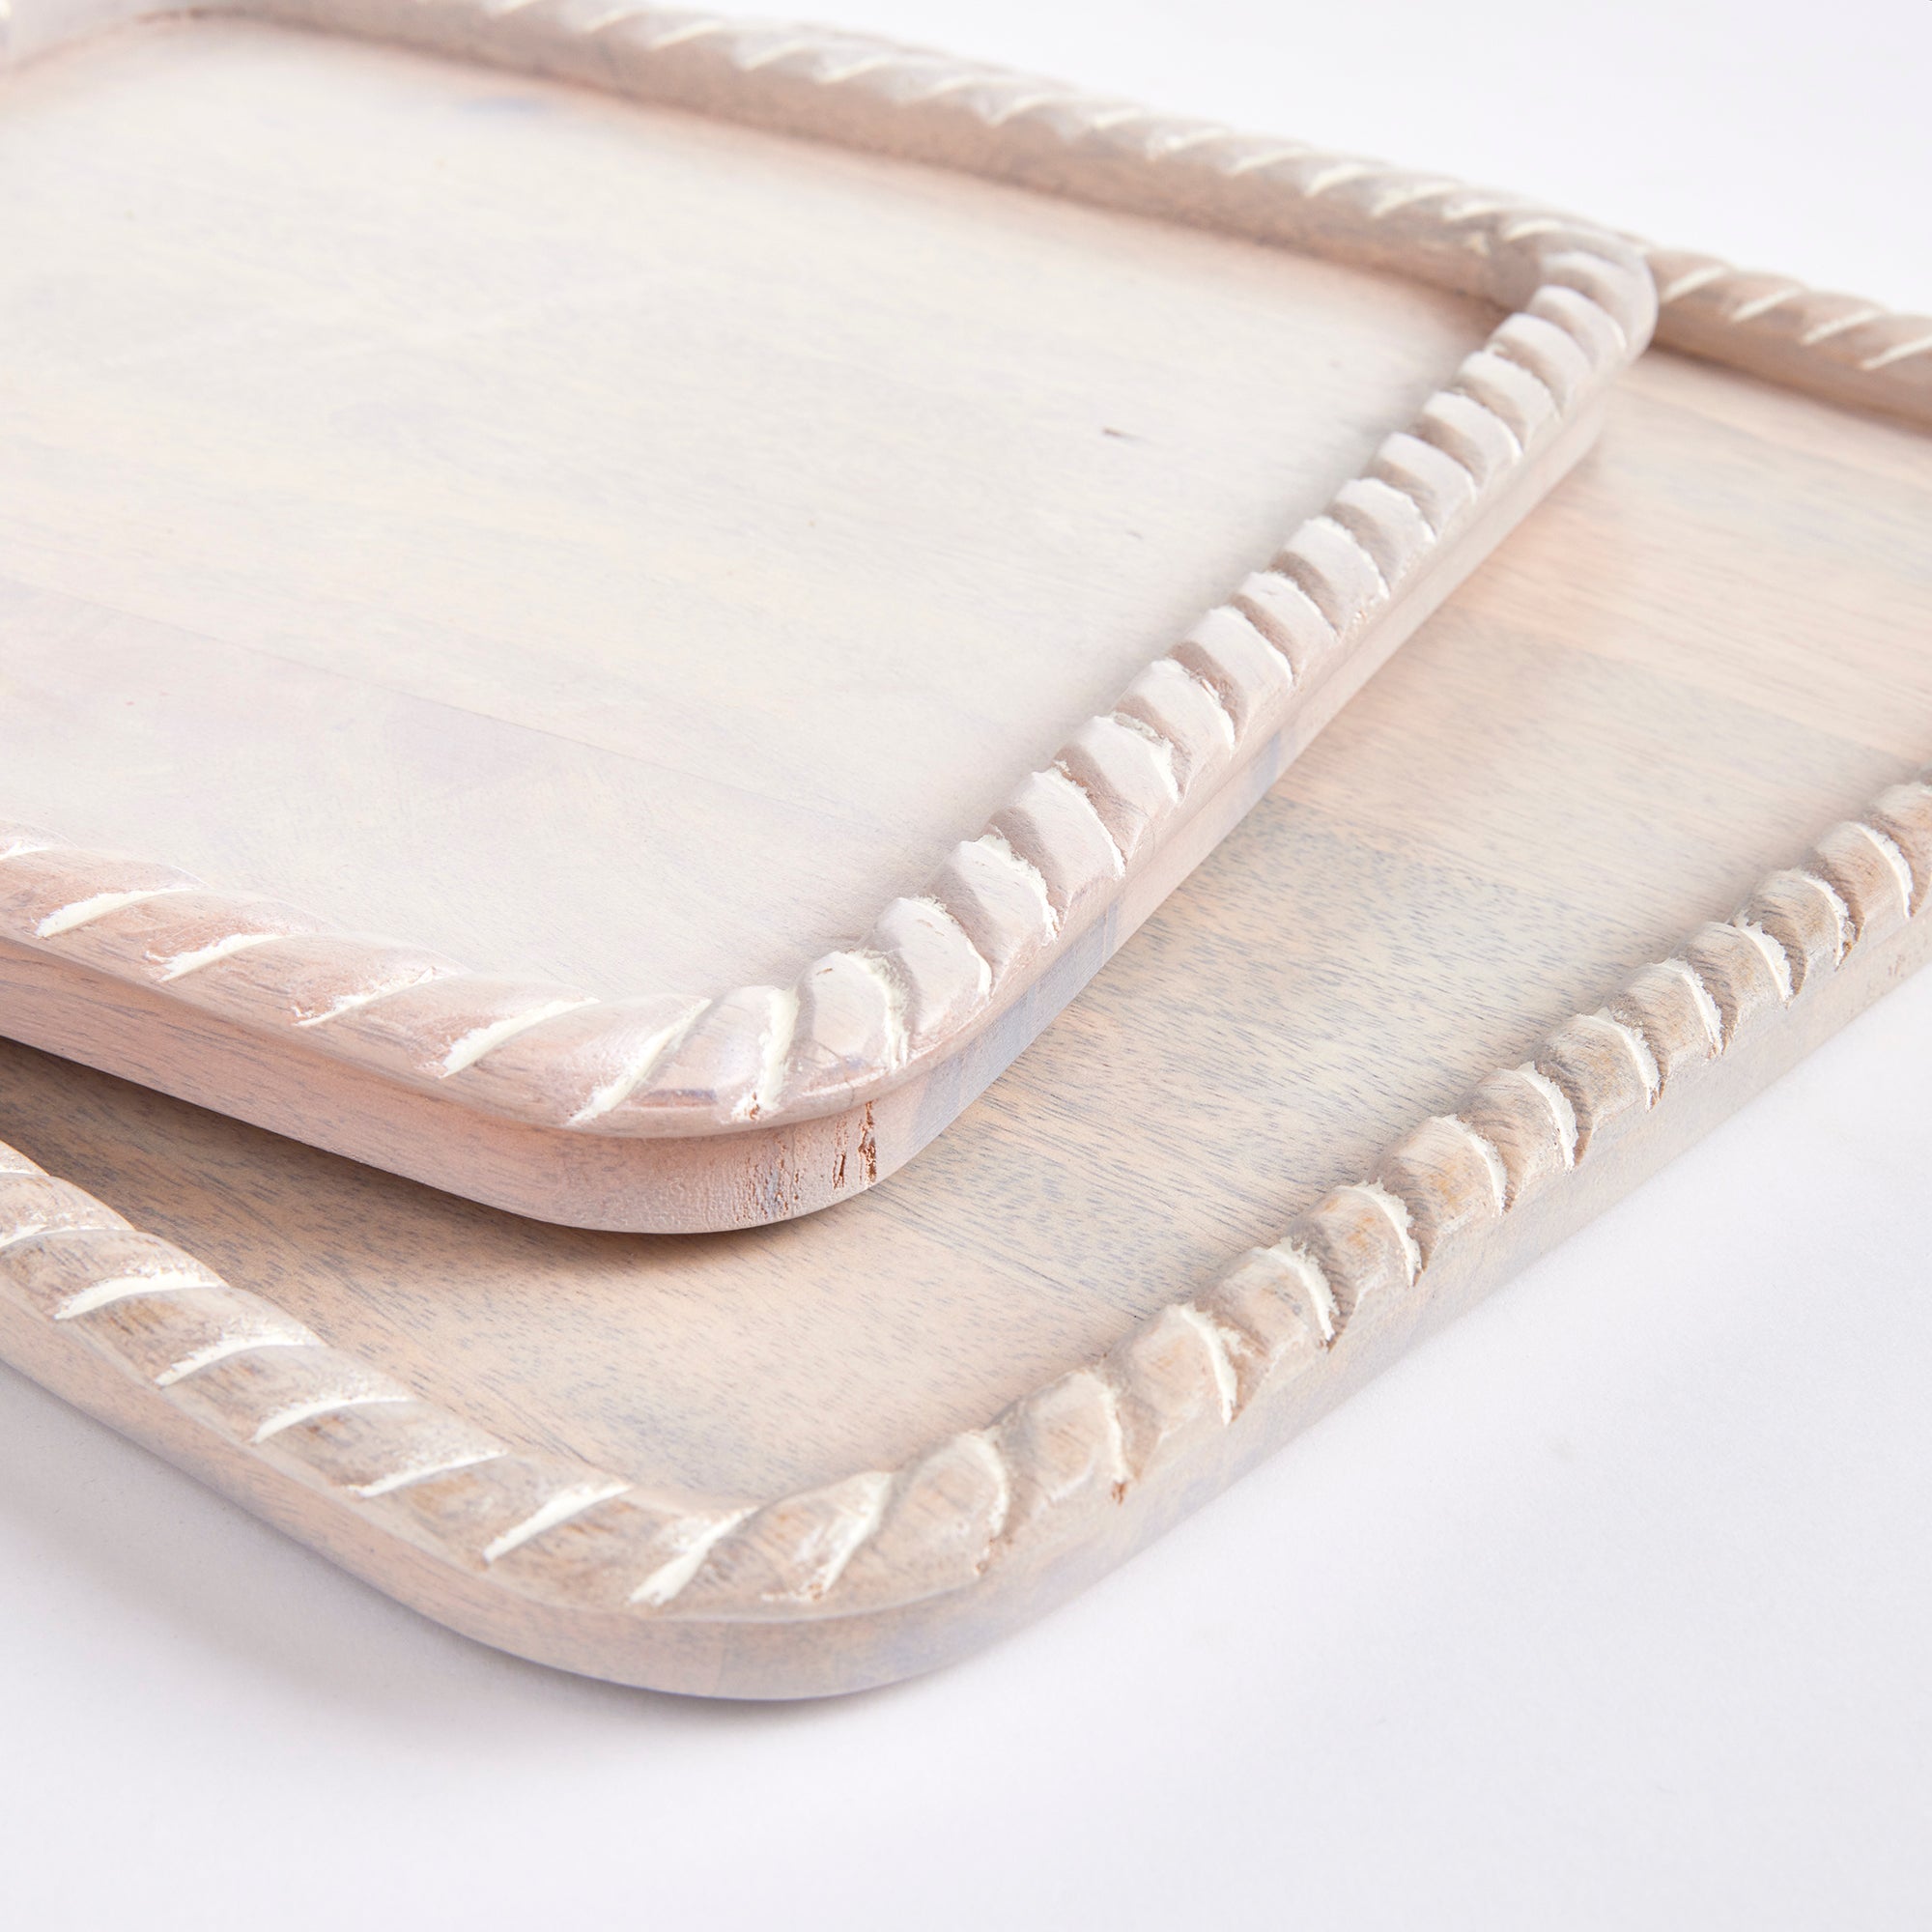 Hand carved from mango wood, this pair of trays is a sweet little accent for baked goods or a cheese tray. A little touch of natural wood tone is always on trend. Amethyst Home provides interior design, new construction, custom furniture, and area rugs in the Monterey metro area.